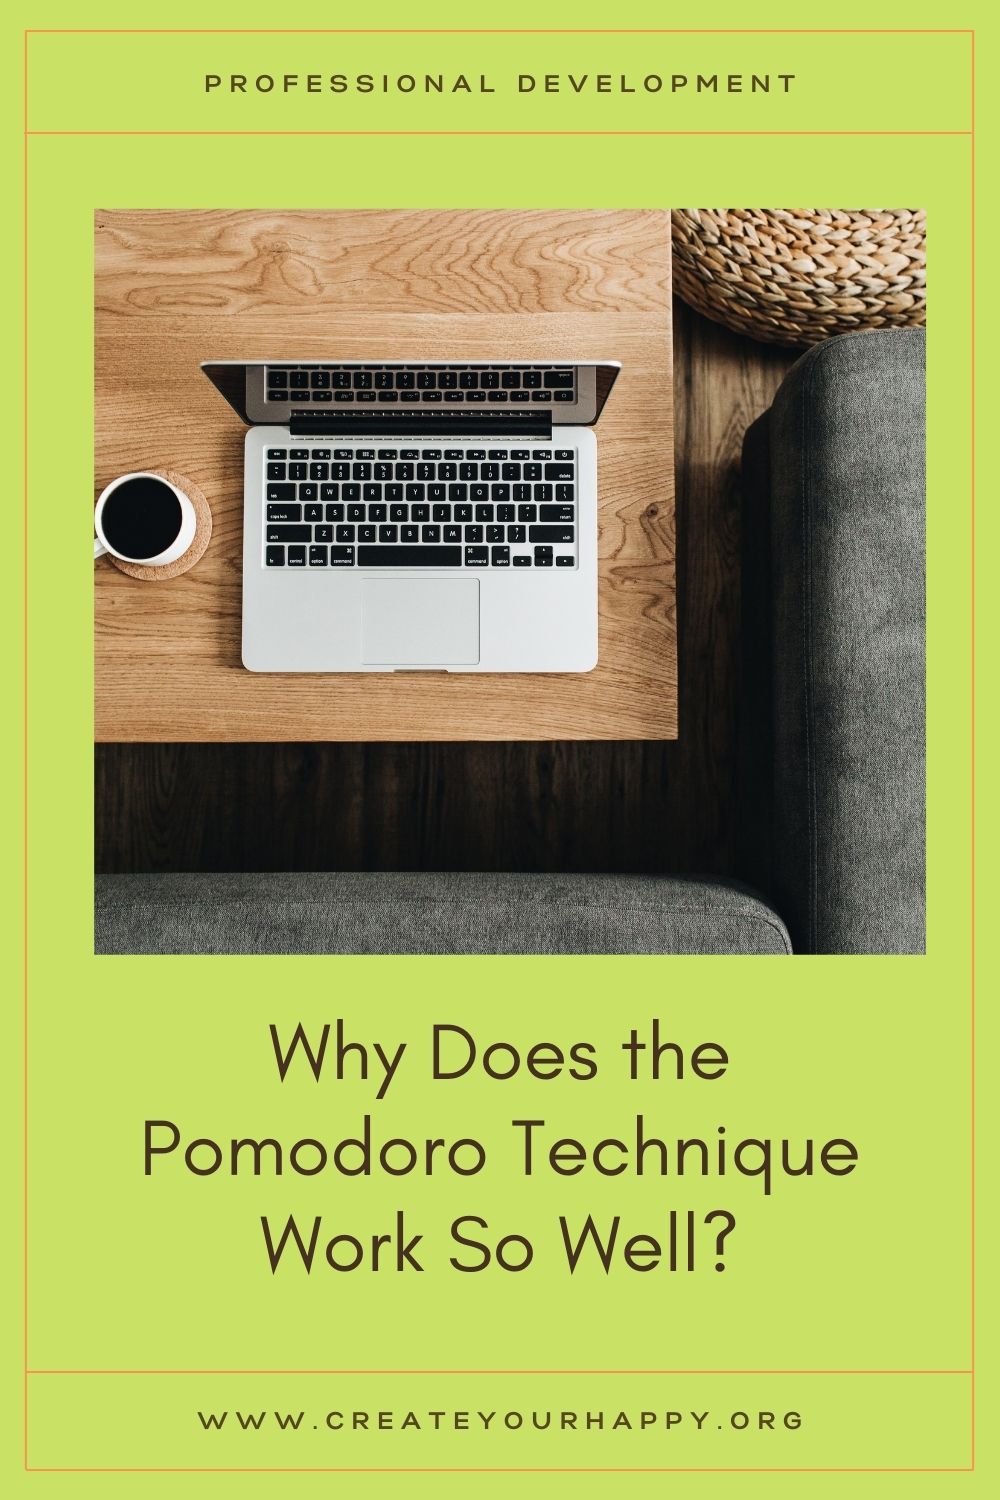 Why Does the Pomodoro Technique Work So Well?